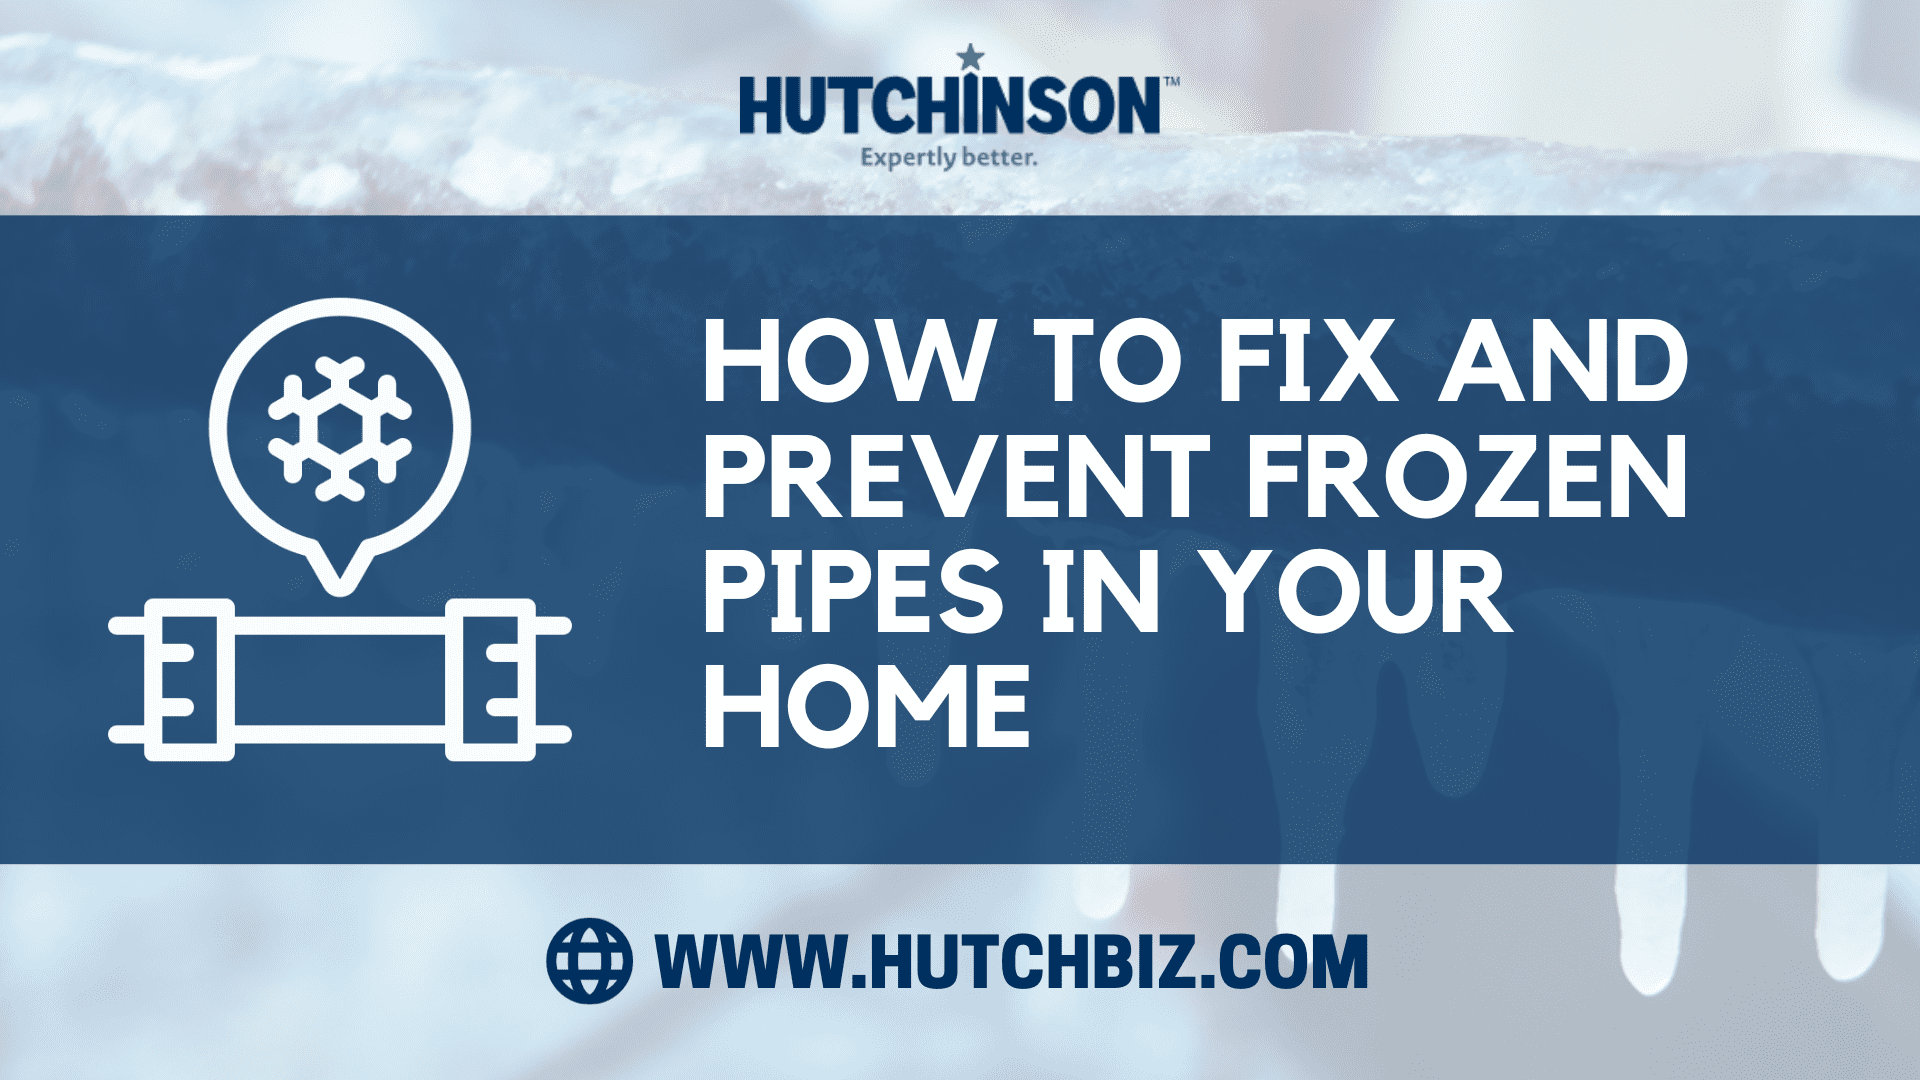 How to Fix and Prevent Frozen Pipes in Your Home